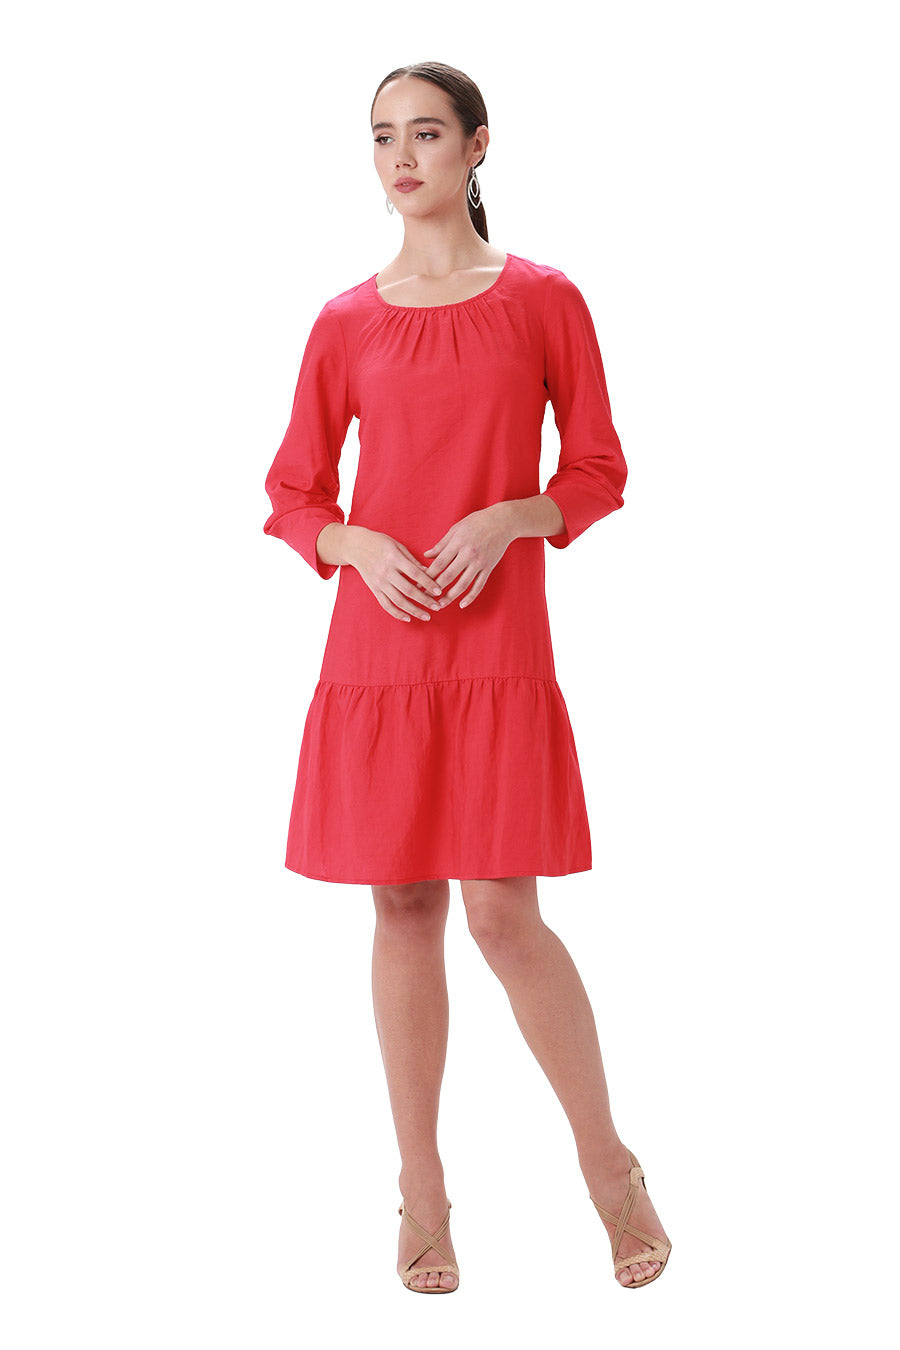 Red belted flounce dress shirred sleeves 